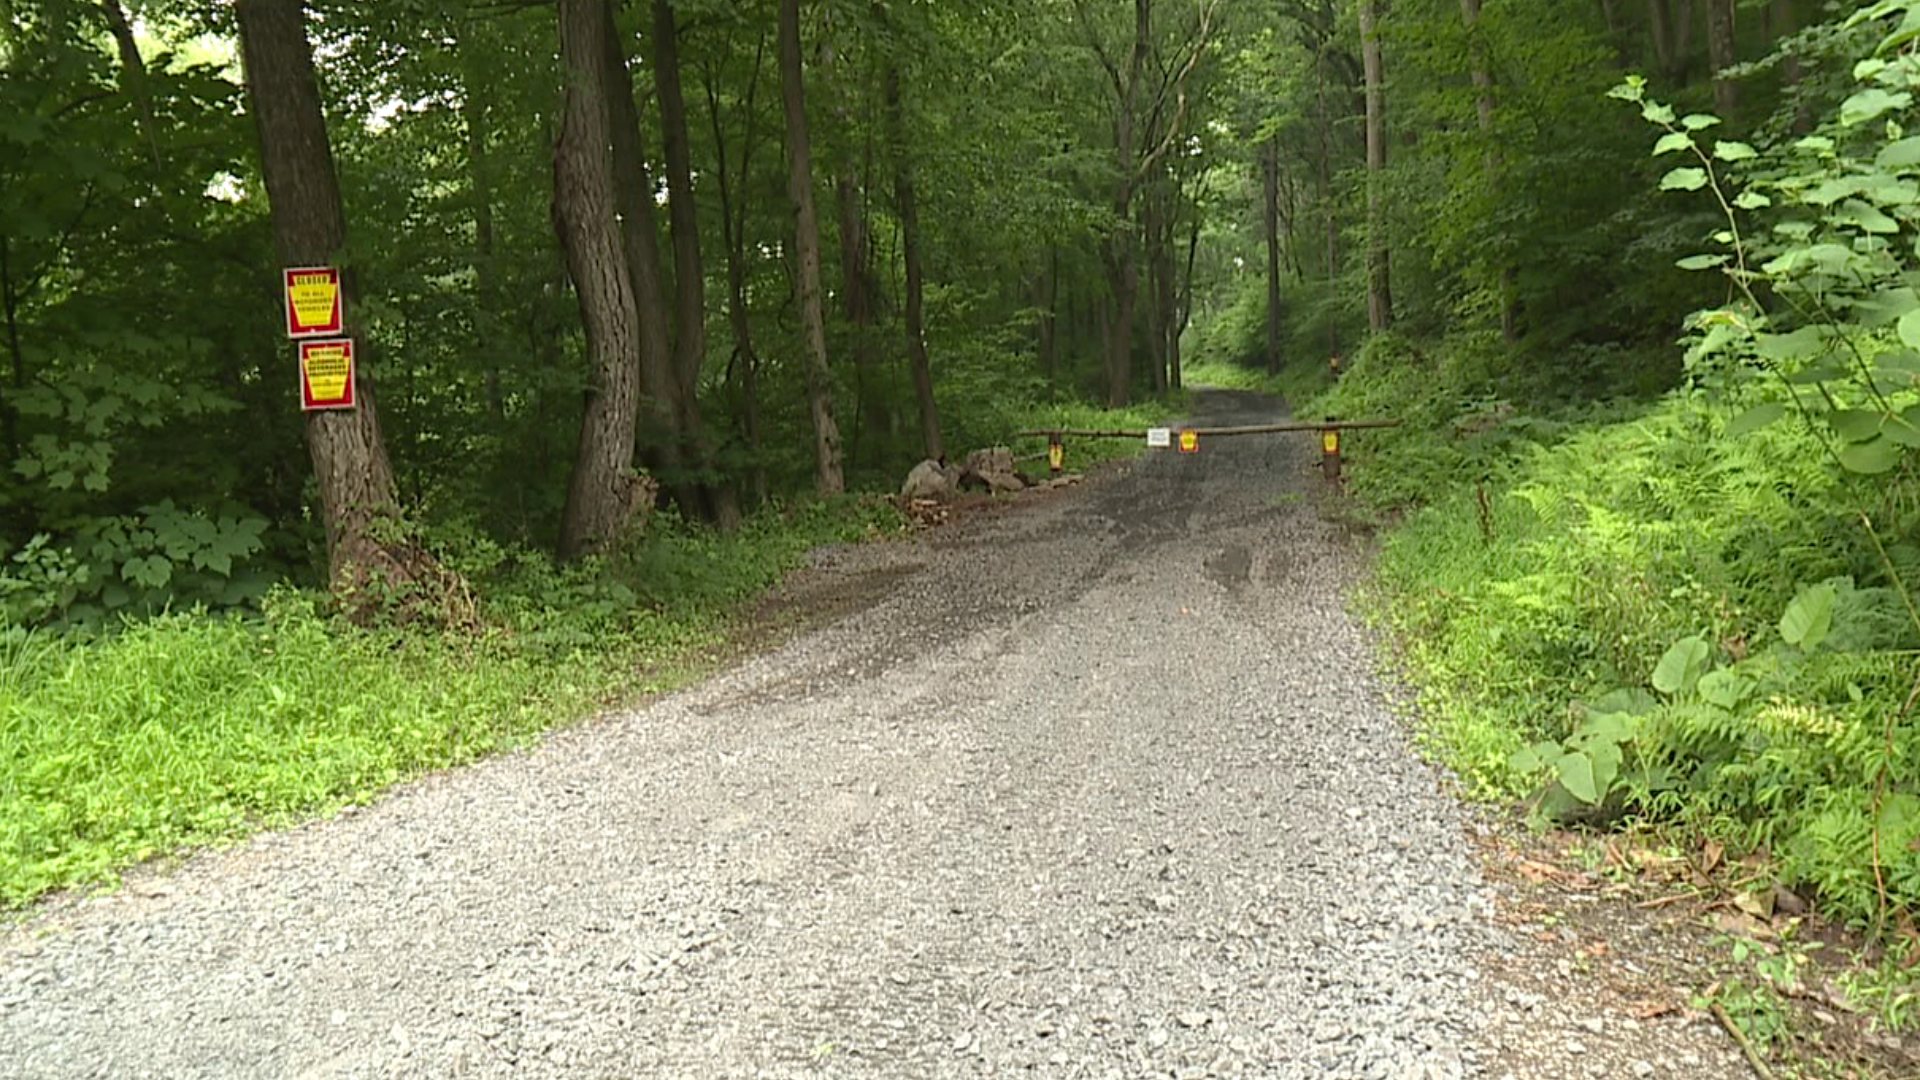 Officials say it happened Monday morning in Schuylkill County.